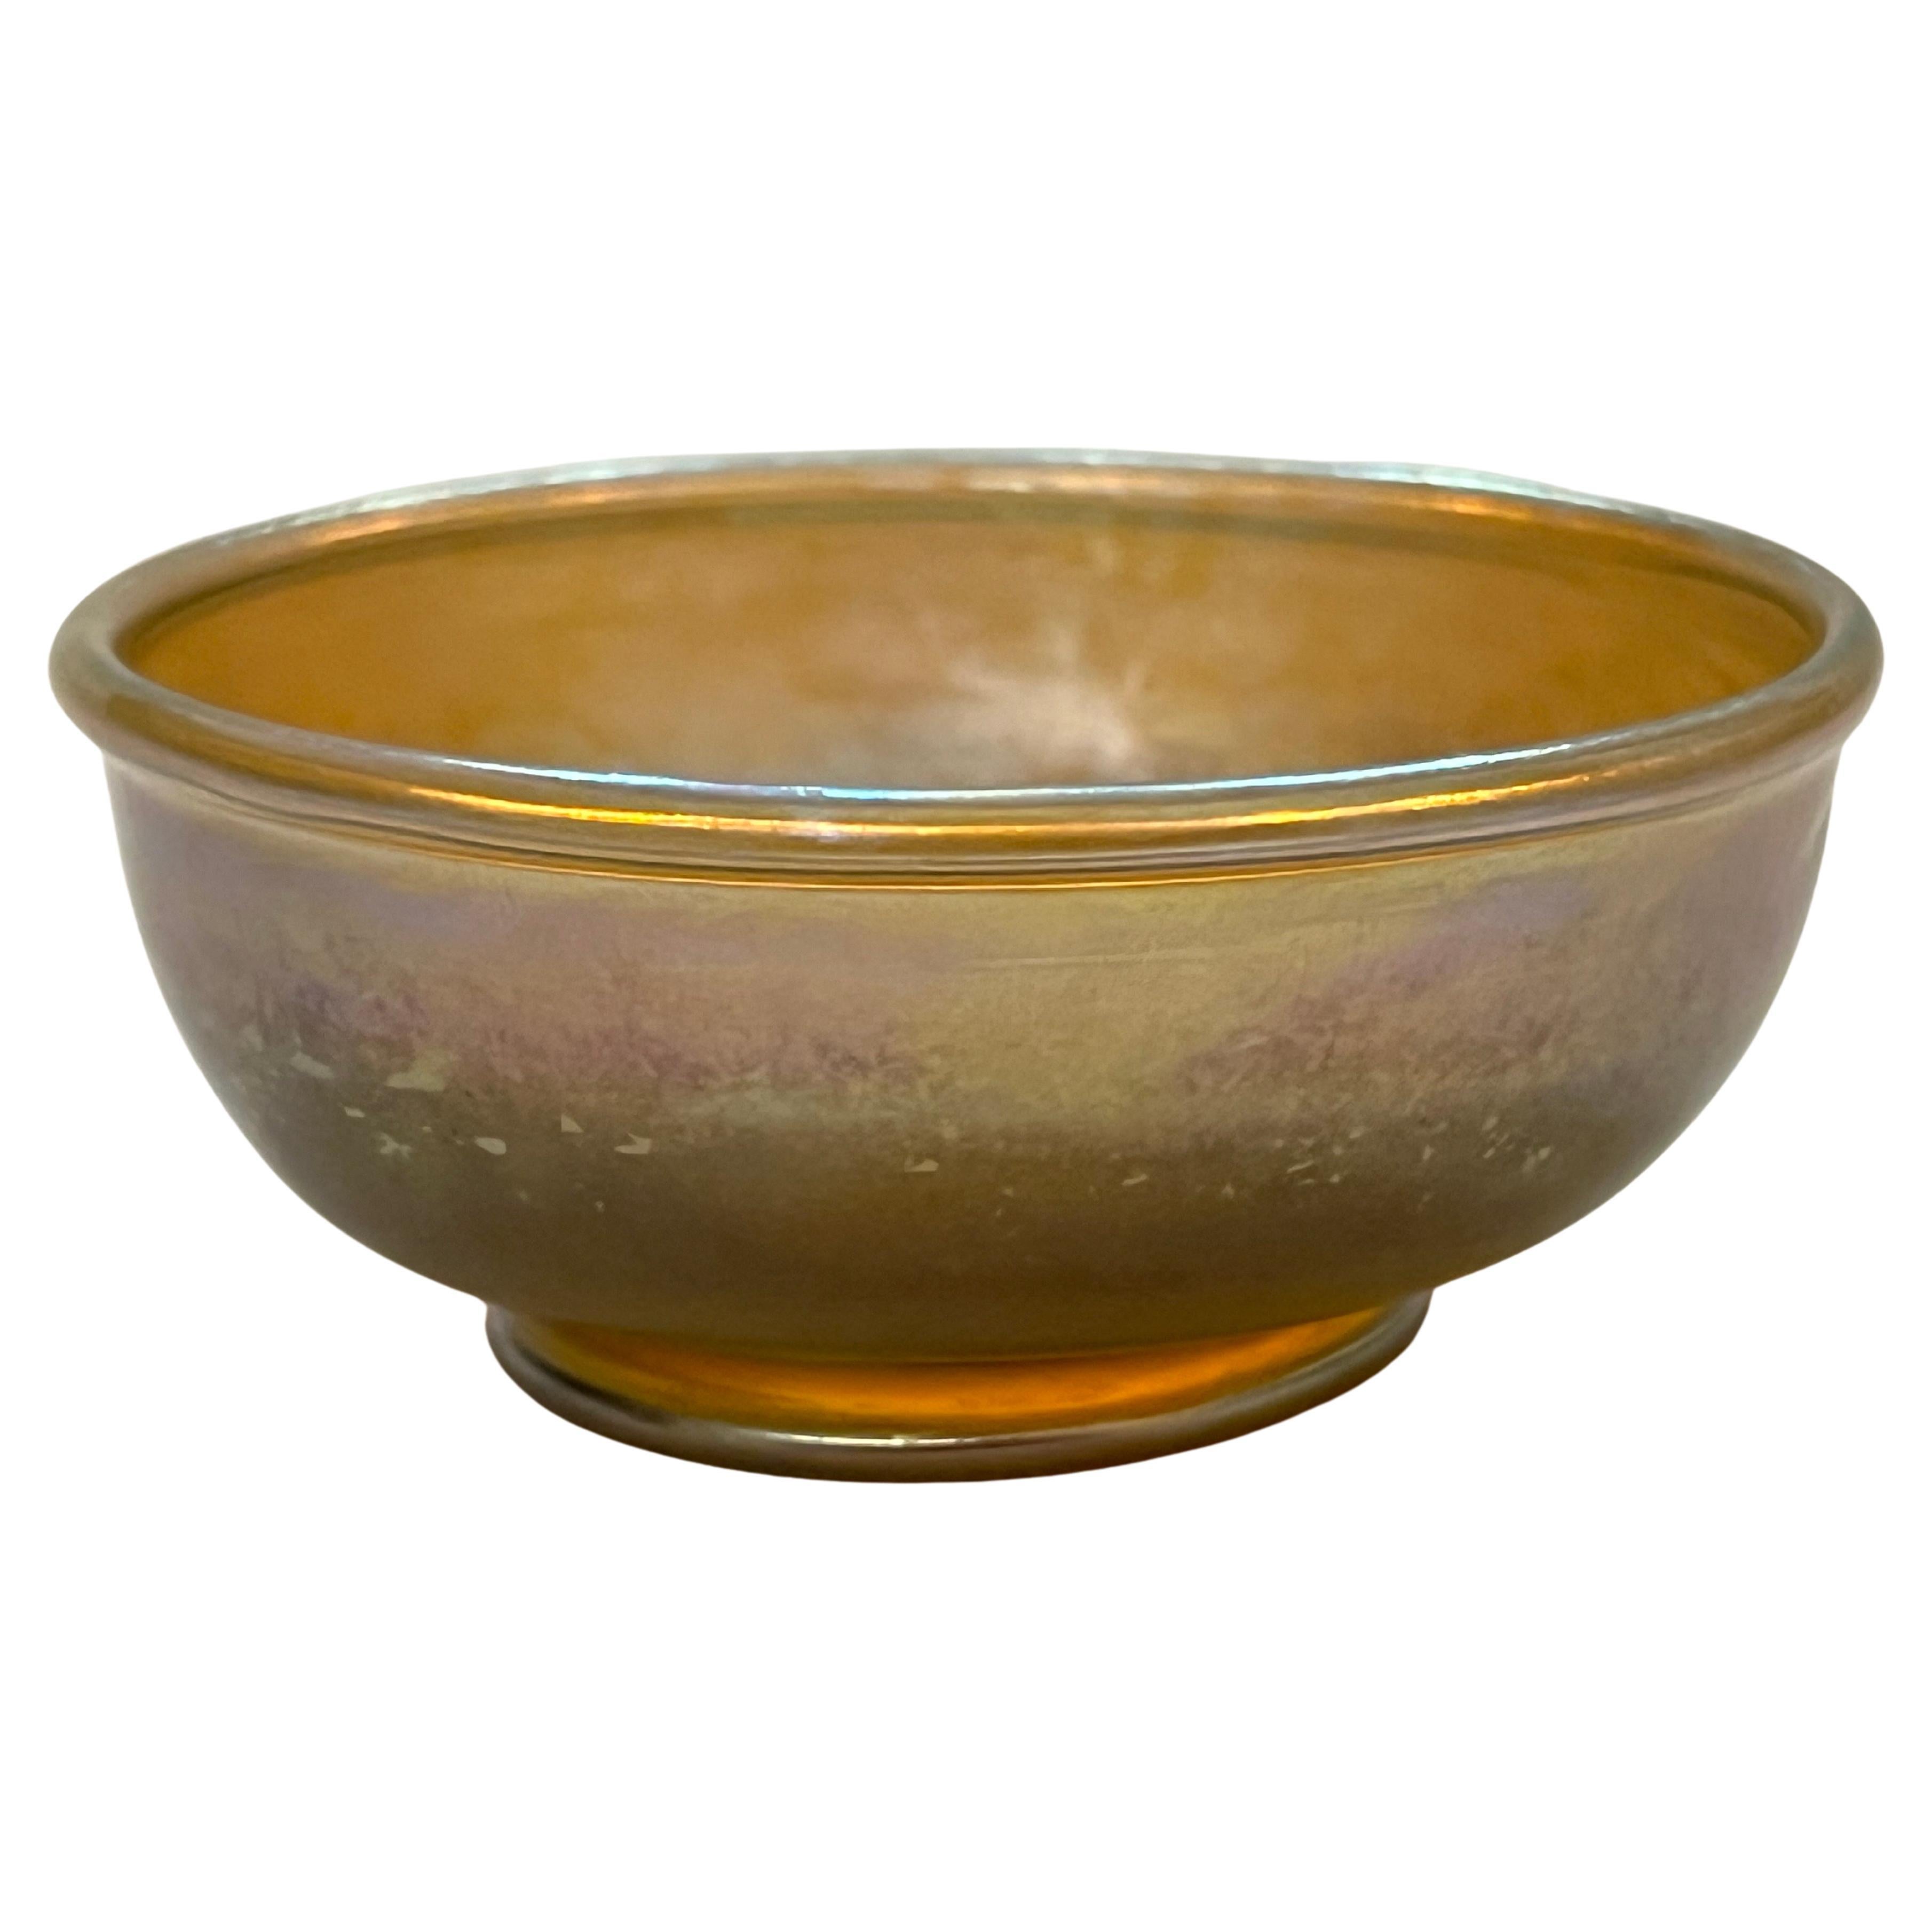 Louis Comfort Tiffany LCT Favrile Glass Antique Bowl Signed Marked Circa 1910 For Sale